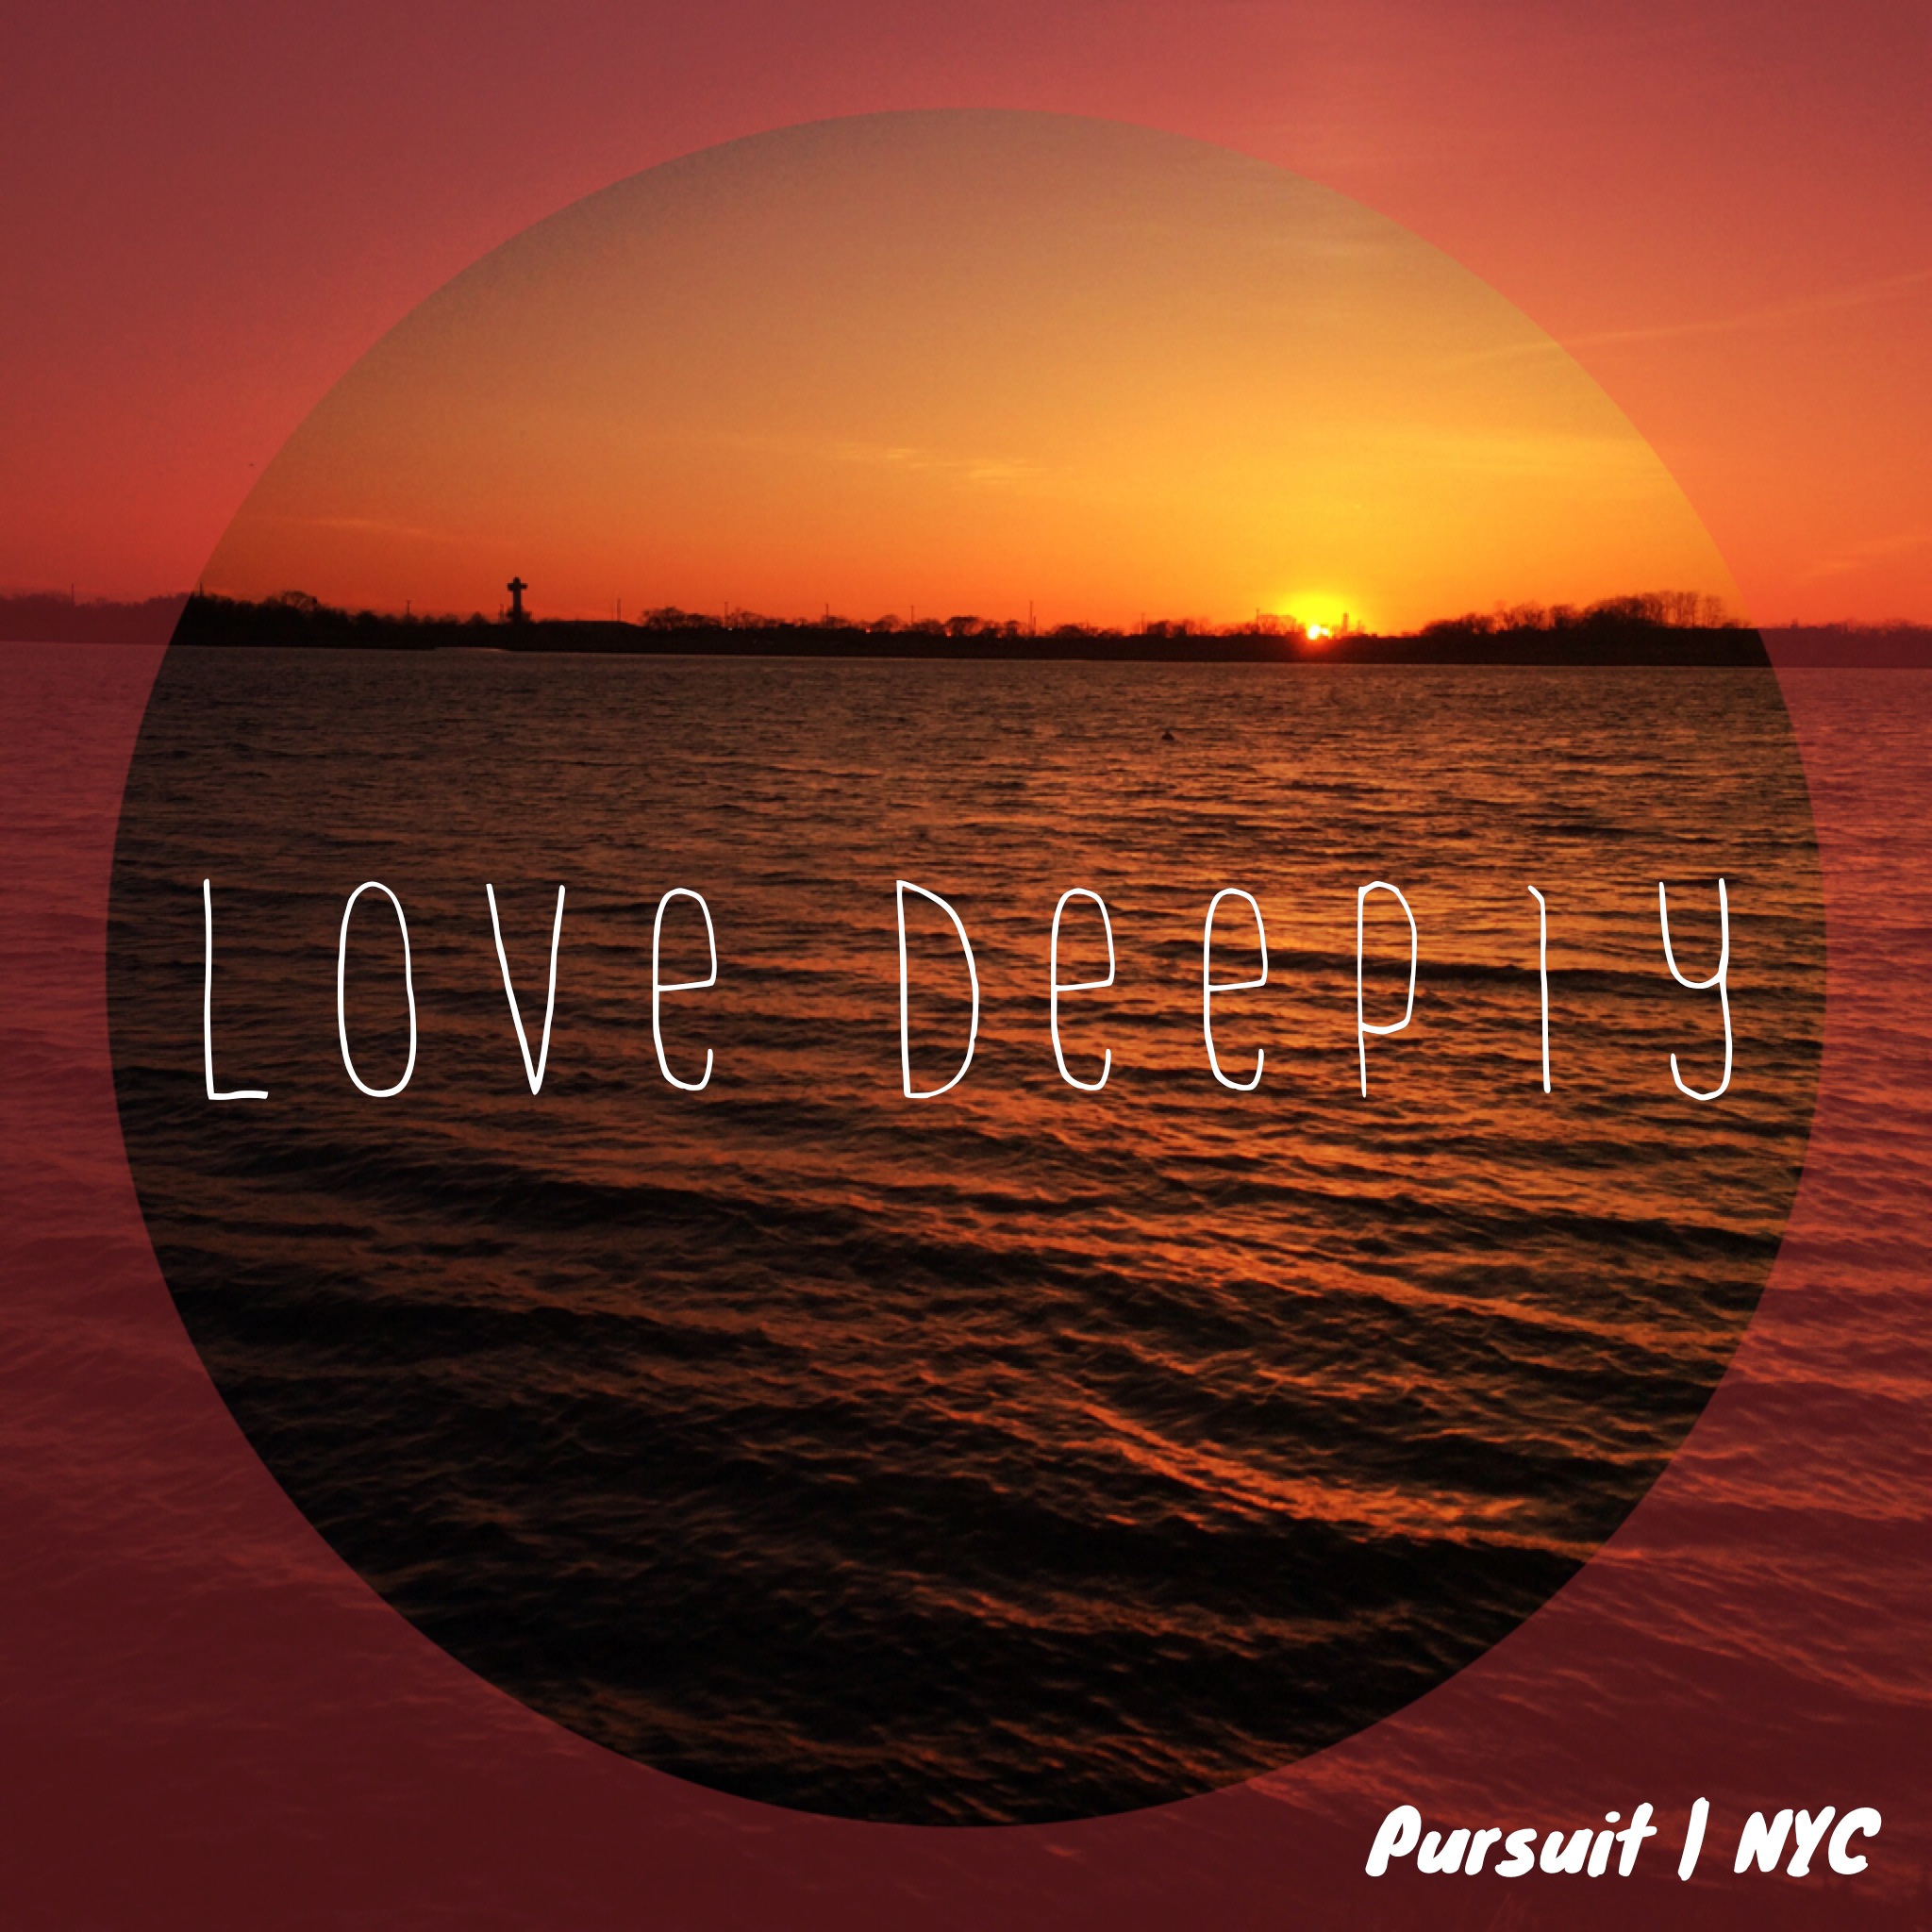 Love Deeply | Pursuit NYC